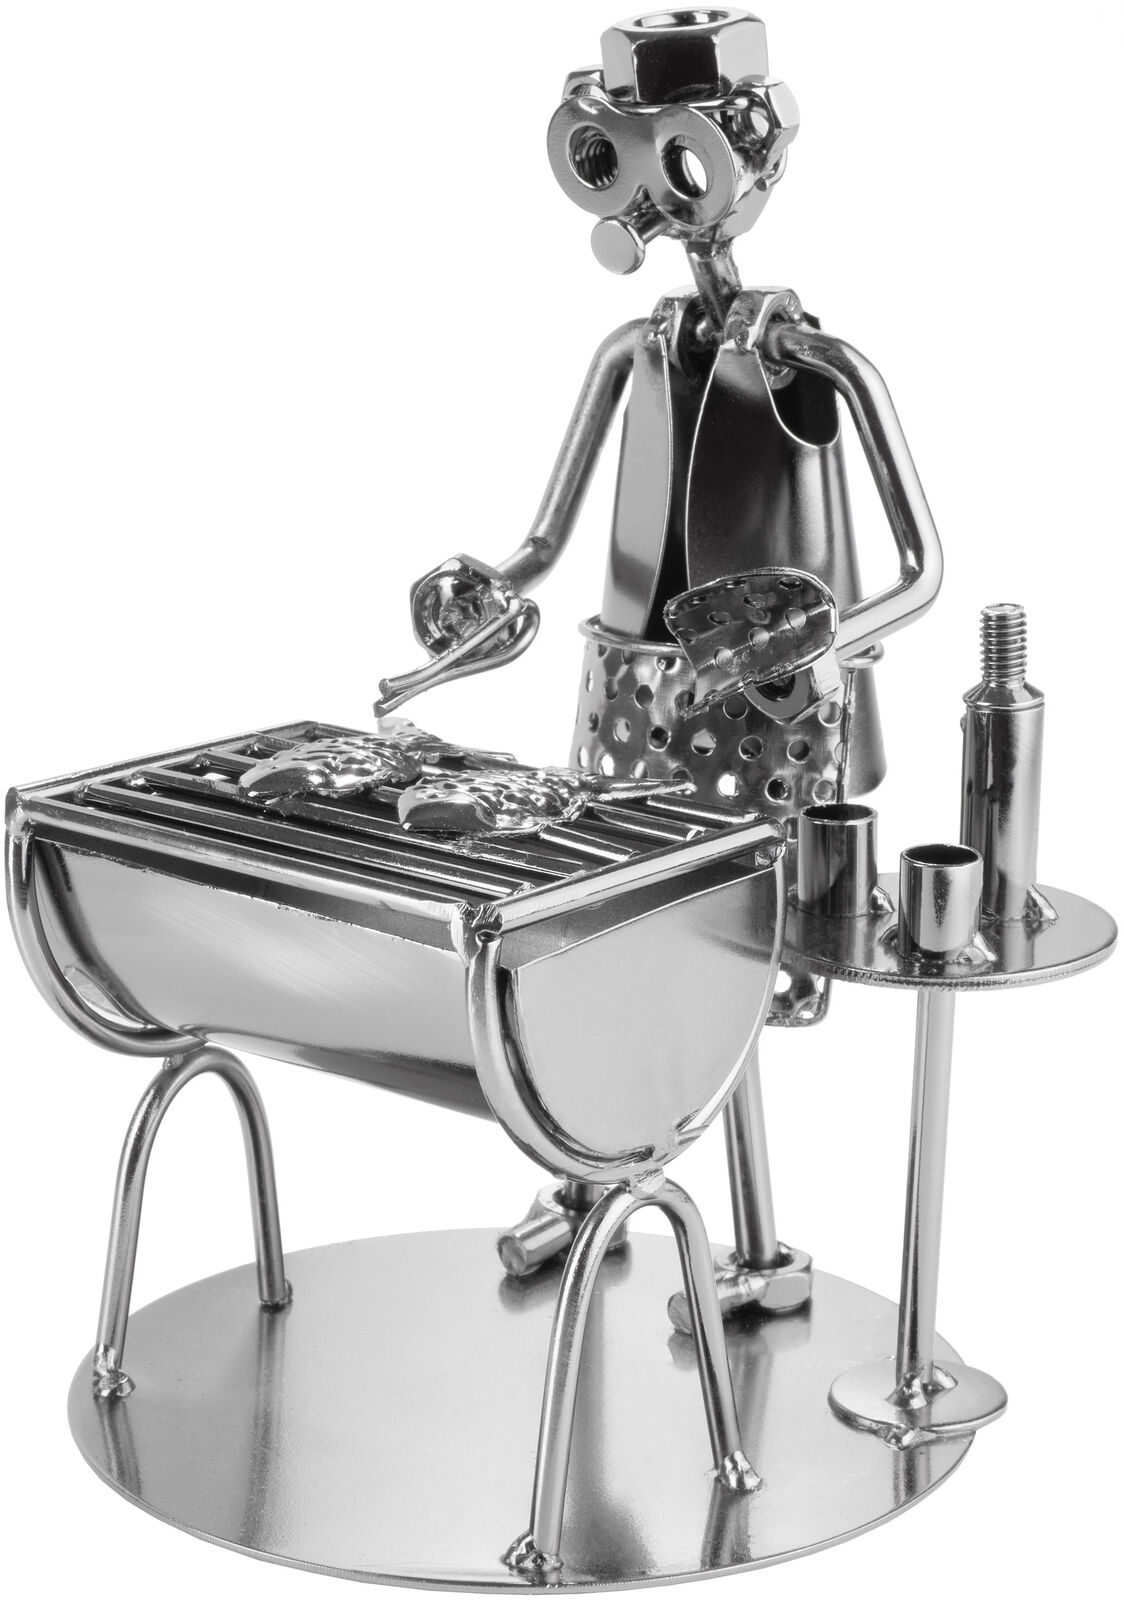 BRUBAKER Nuts and Bolts Sculpture Barbecue Grill - Grill Master Fish